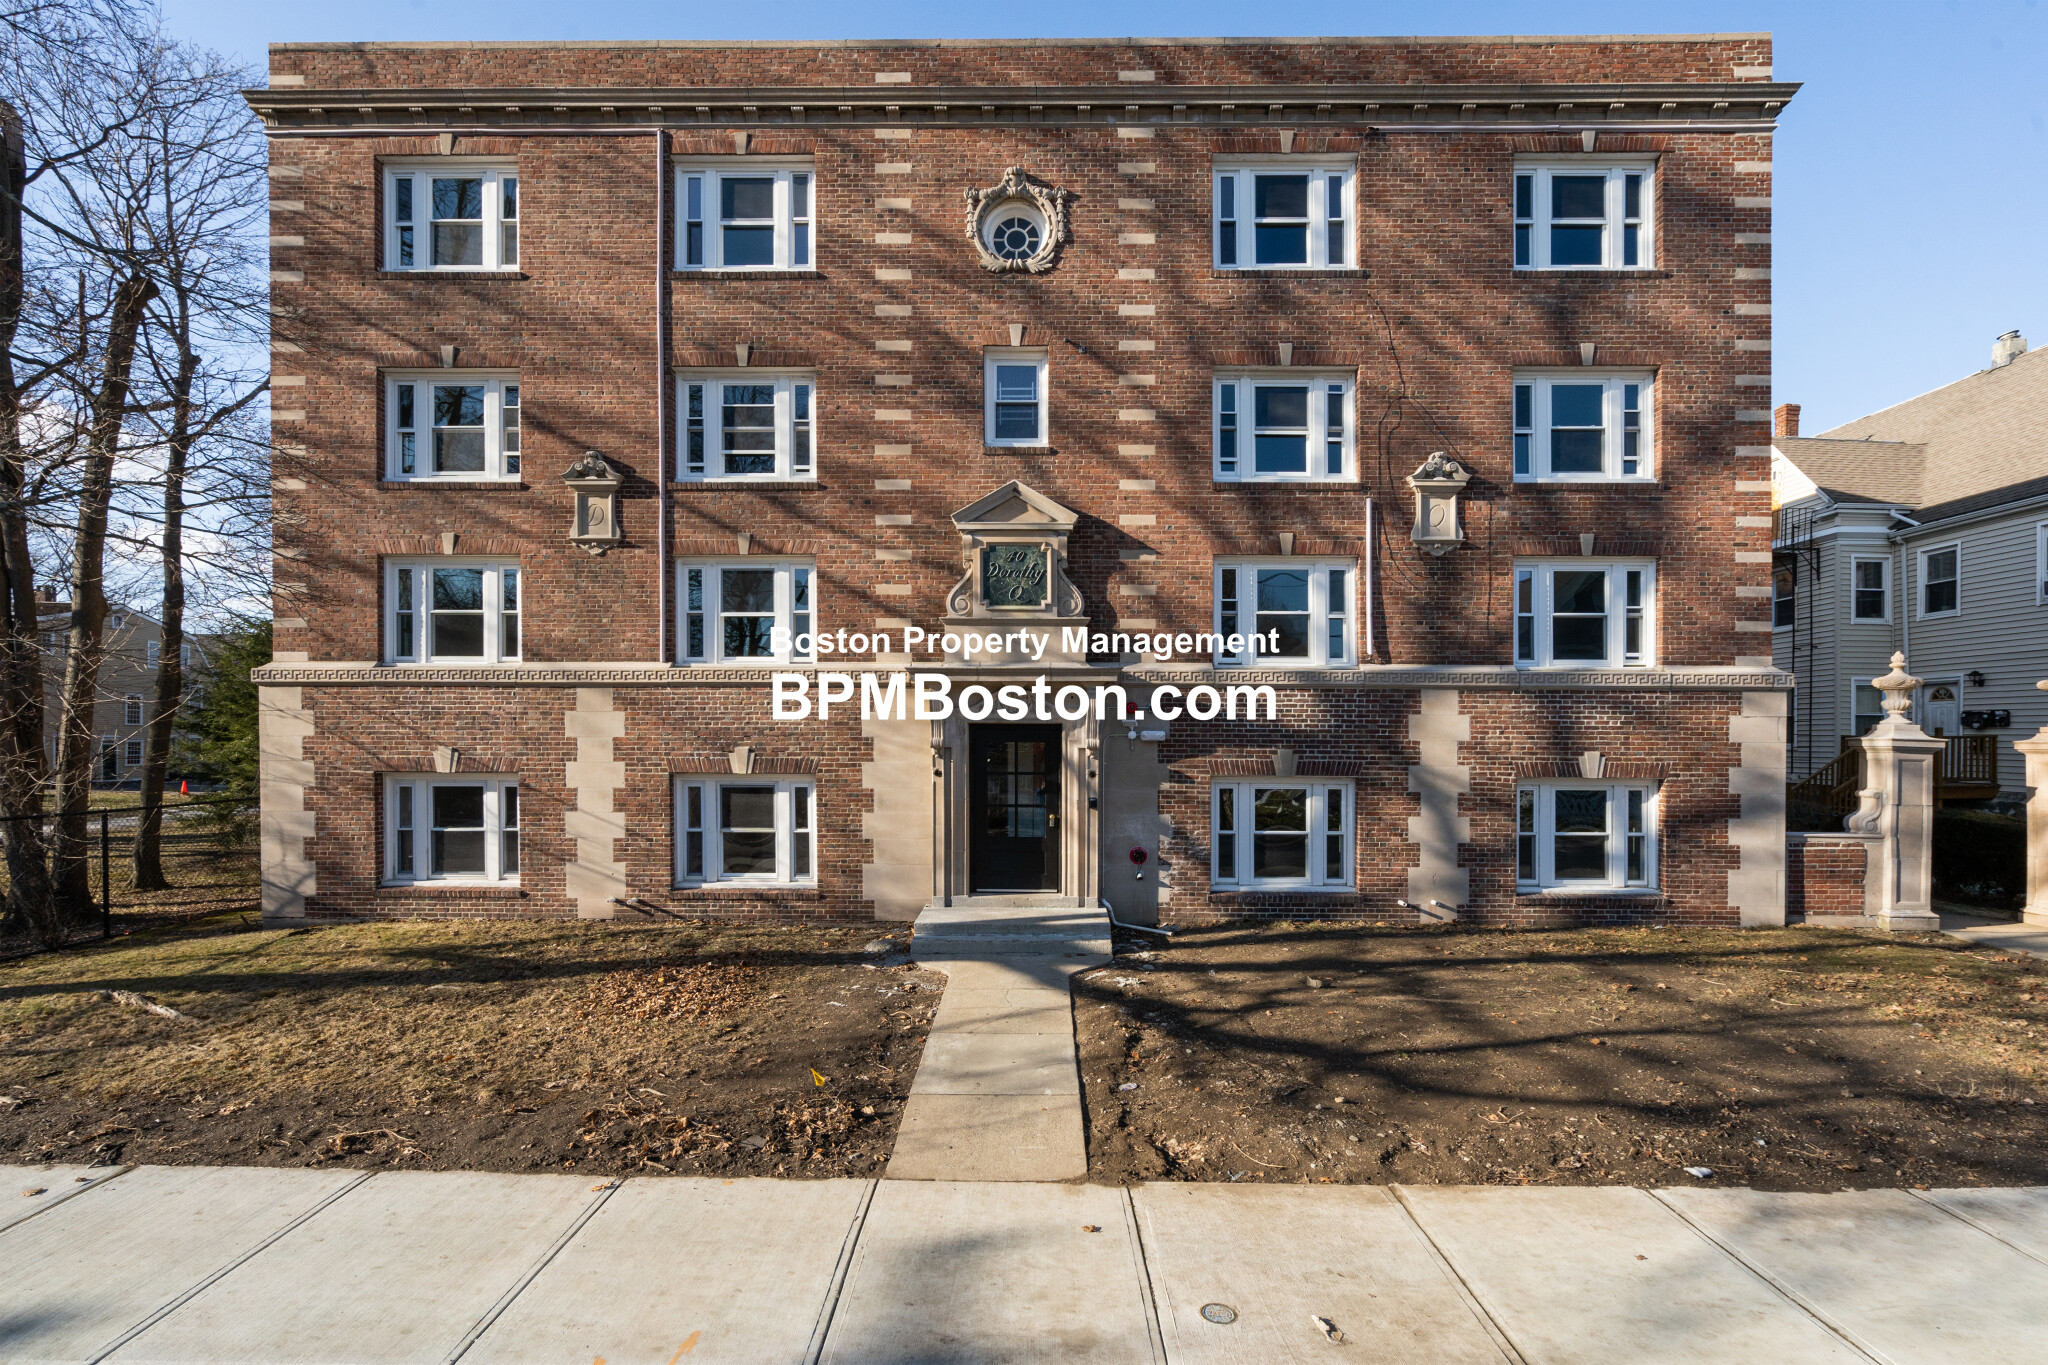 Photos of apartment on Wren,Quincy MA 02169